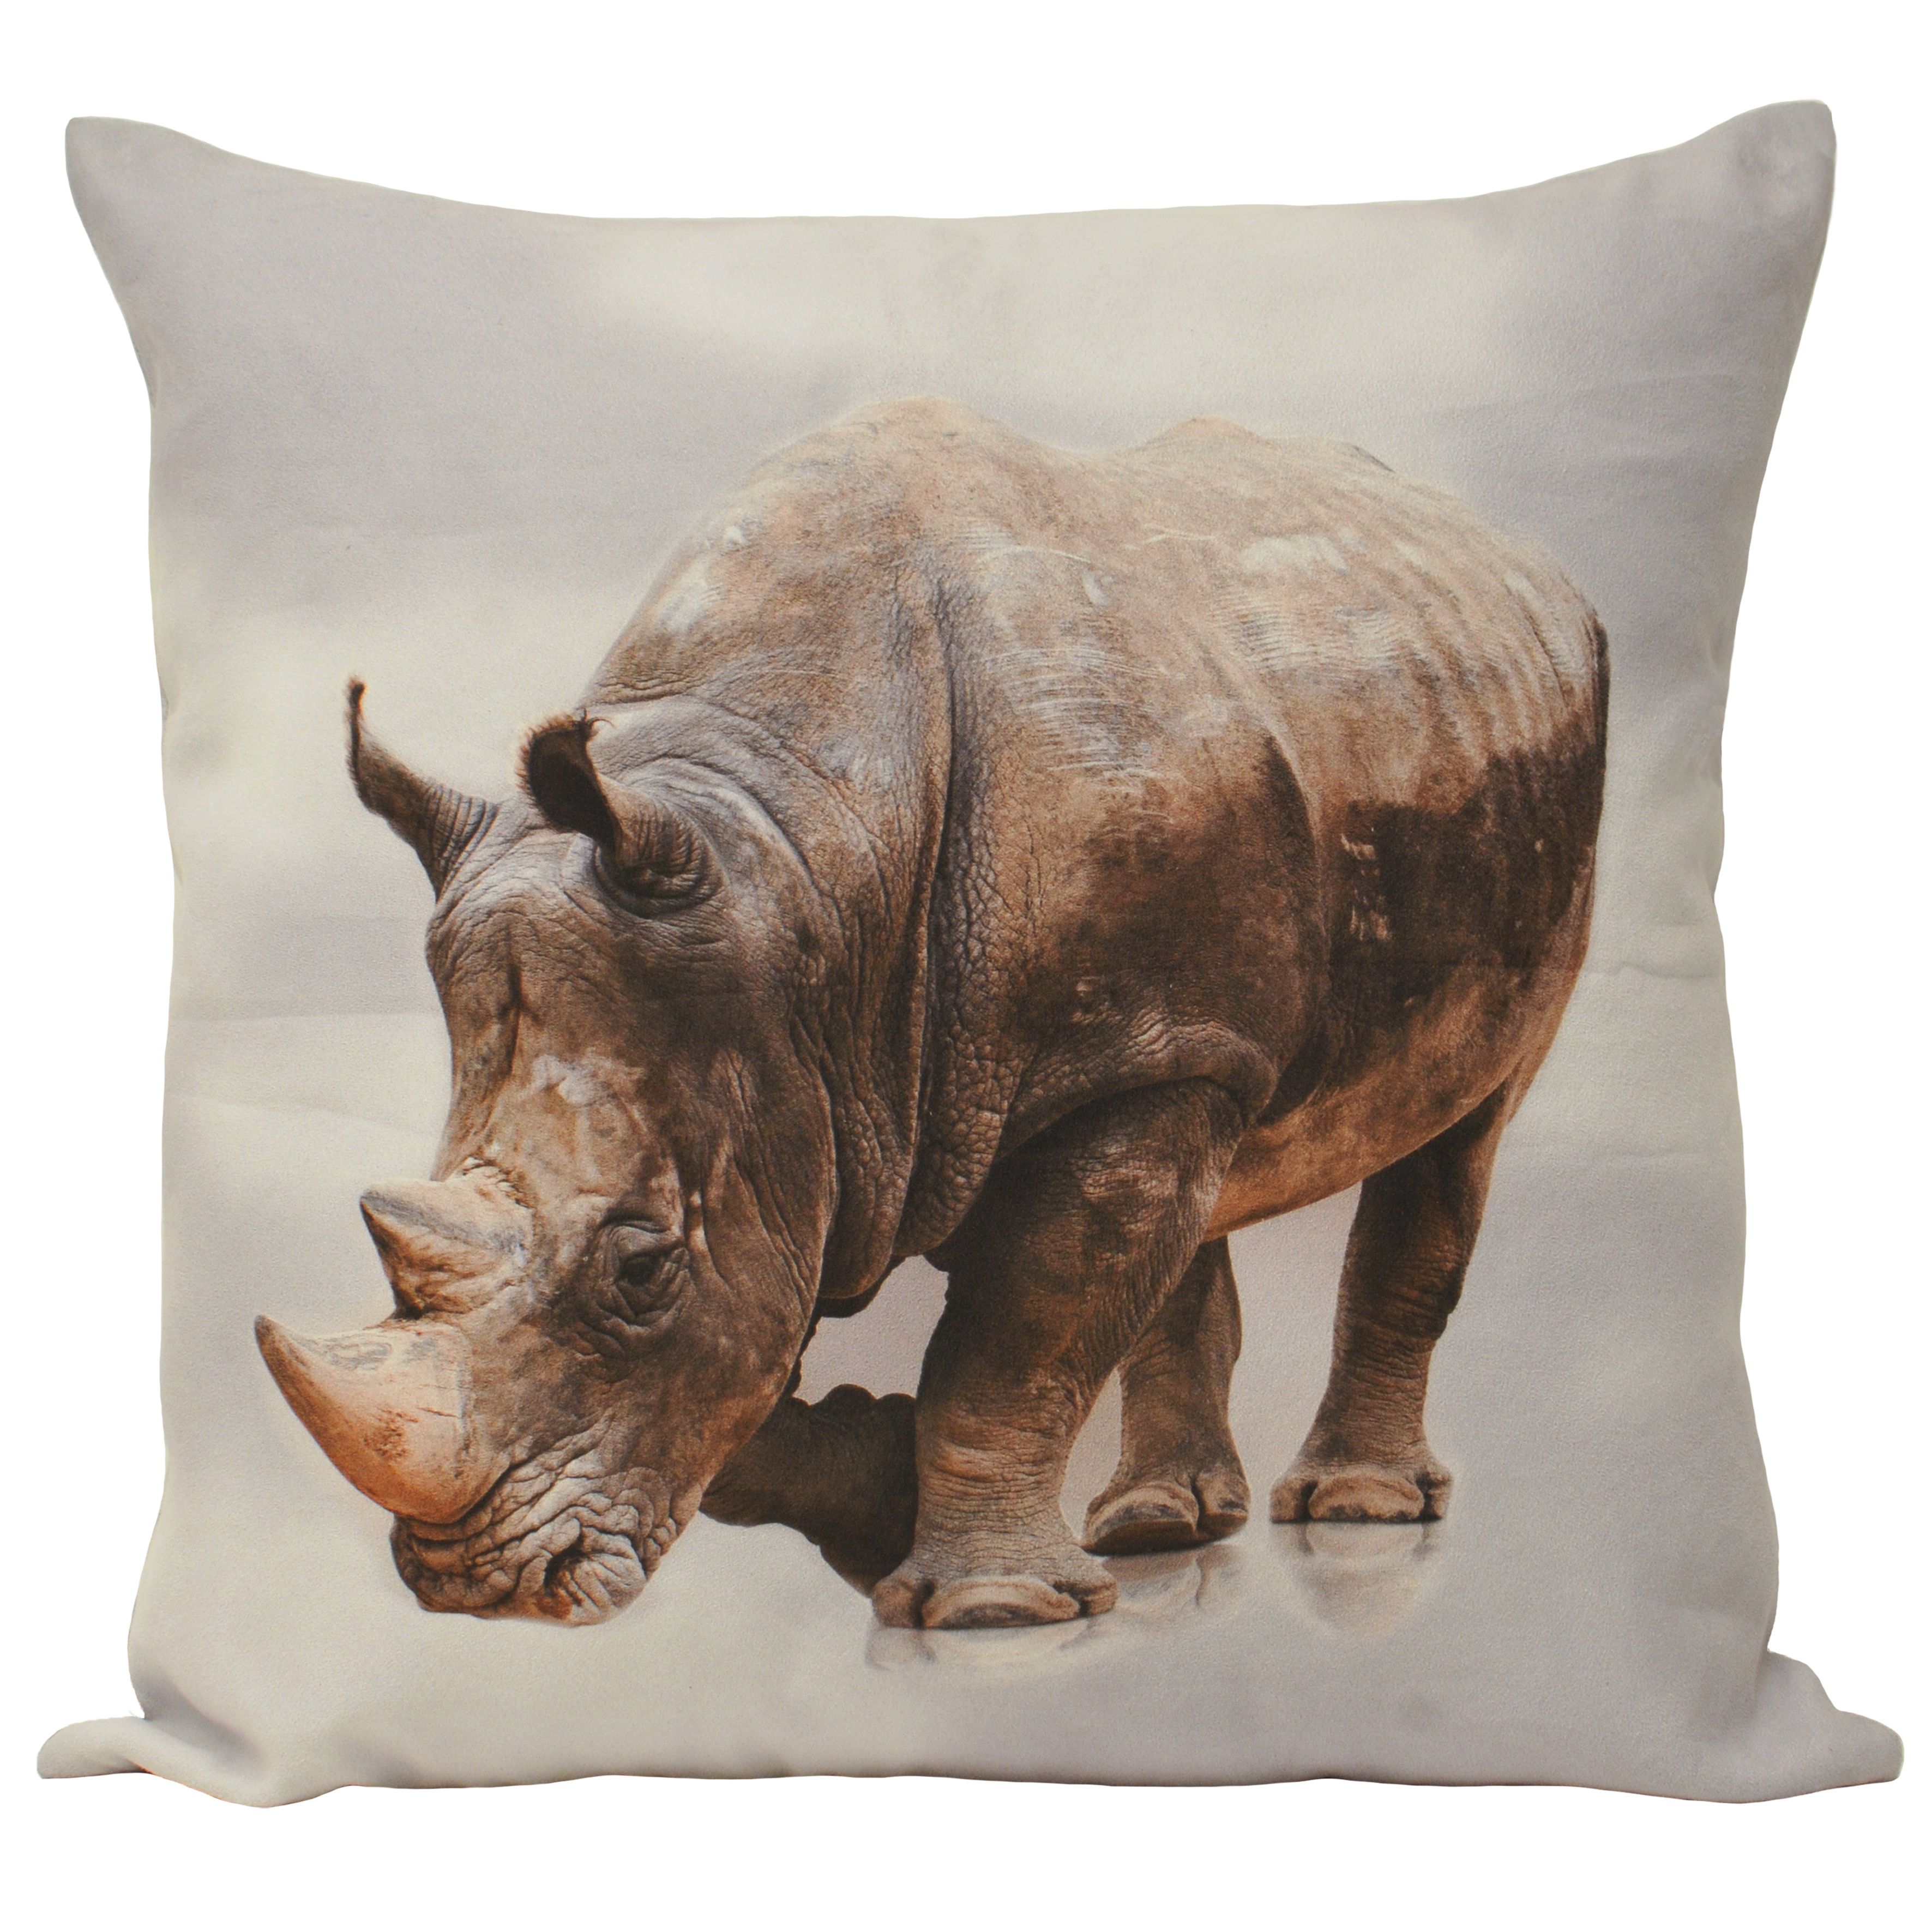 Show your wild side with the Paoletti Rhino Animal Polyester Filled Cushion. Featuring a realistic print of a powerful black rhinoceros it will be a definite talking point. This soft Polyester Filled Cushion is made of faux suede fabric giving it that notable leather-like feel with no harm to any animals in the process. With a hidden zip closure nothing will take away from this cushions unique design. Created with 100% hard-wearing polyester this will be a cushion you'll love for years to come. Unlike most faux suede this Polyester Filled Cushion is fully machine washable at 40 degrees, however we do not recommend using an iron.